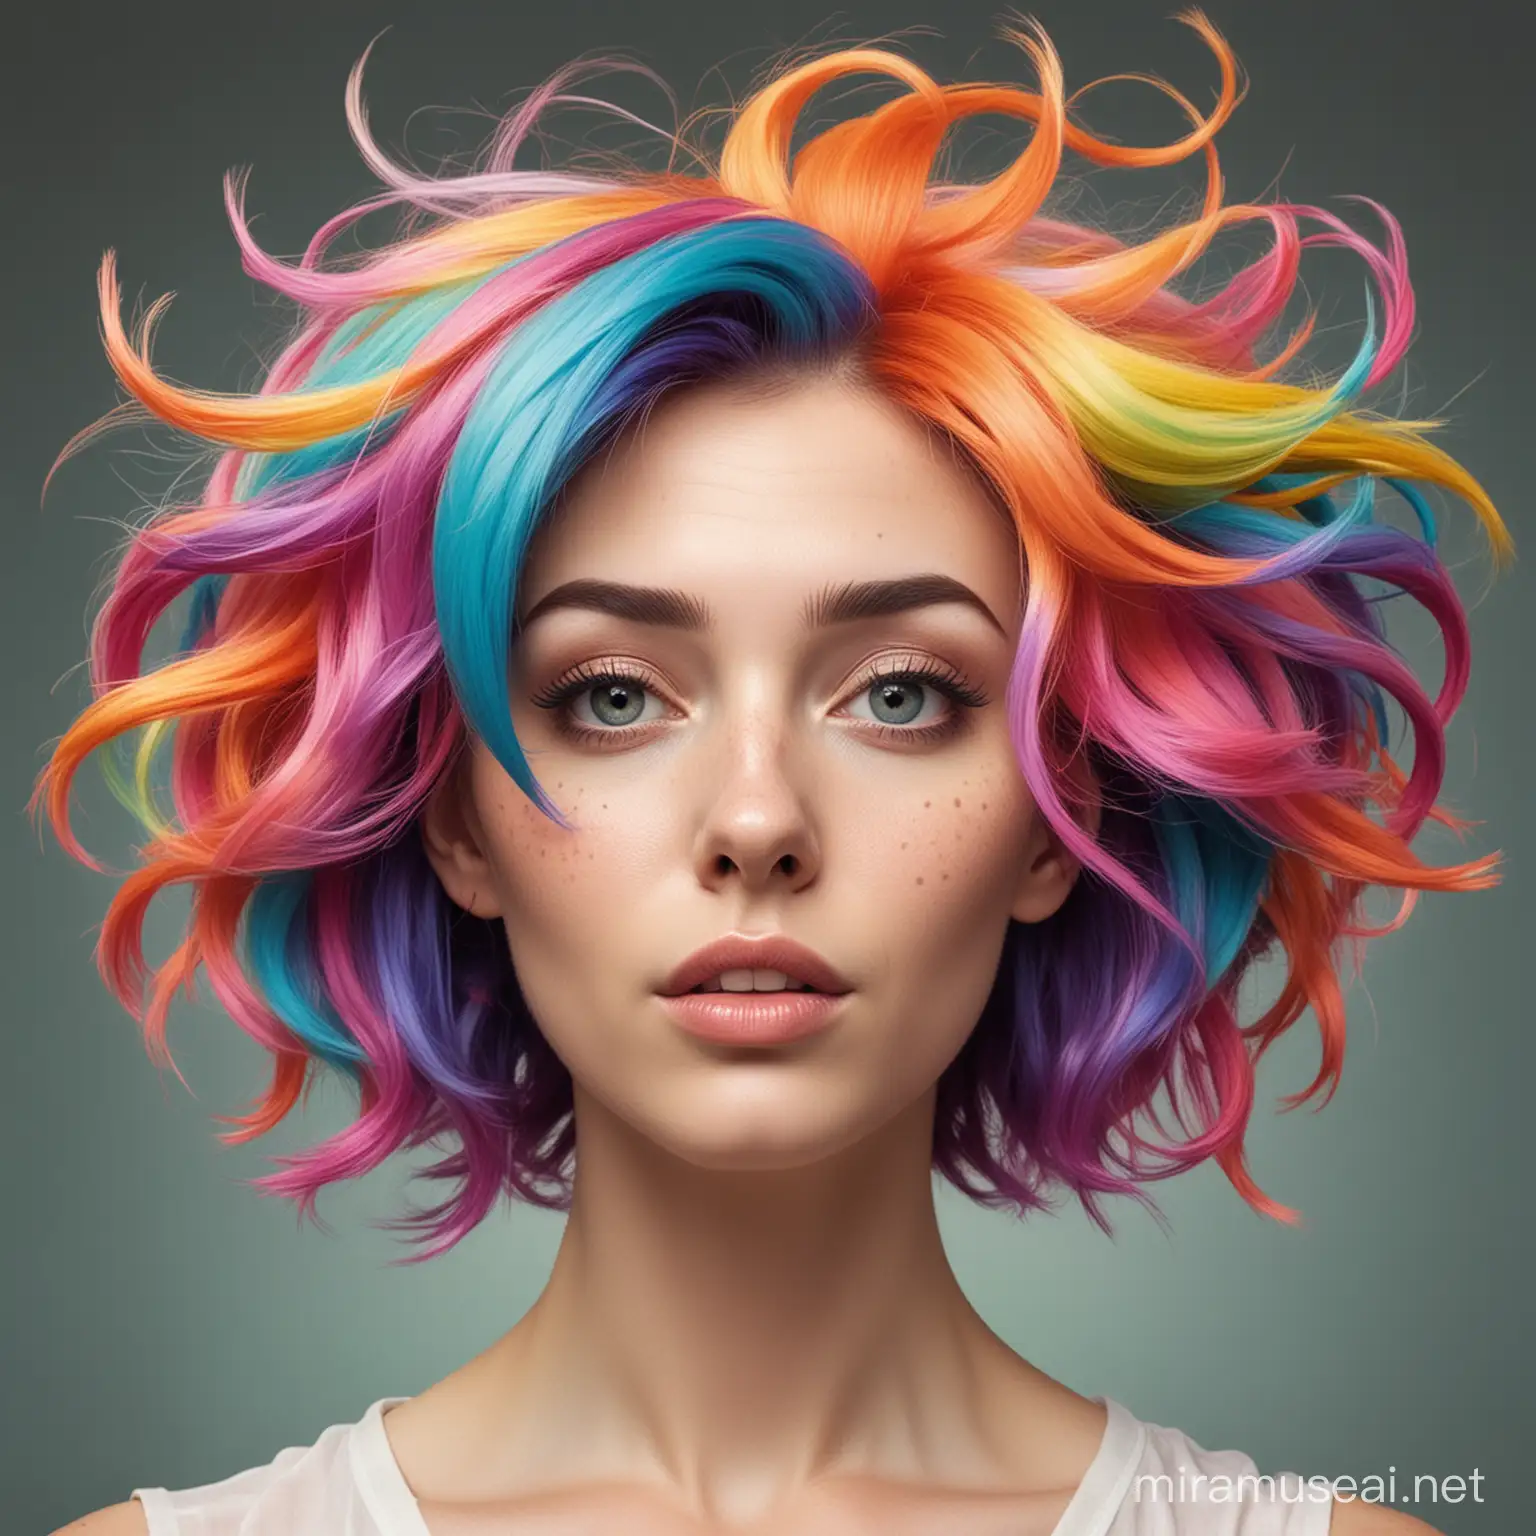 whimstical, eccentric female artist with colorful hair